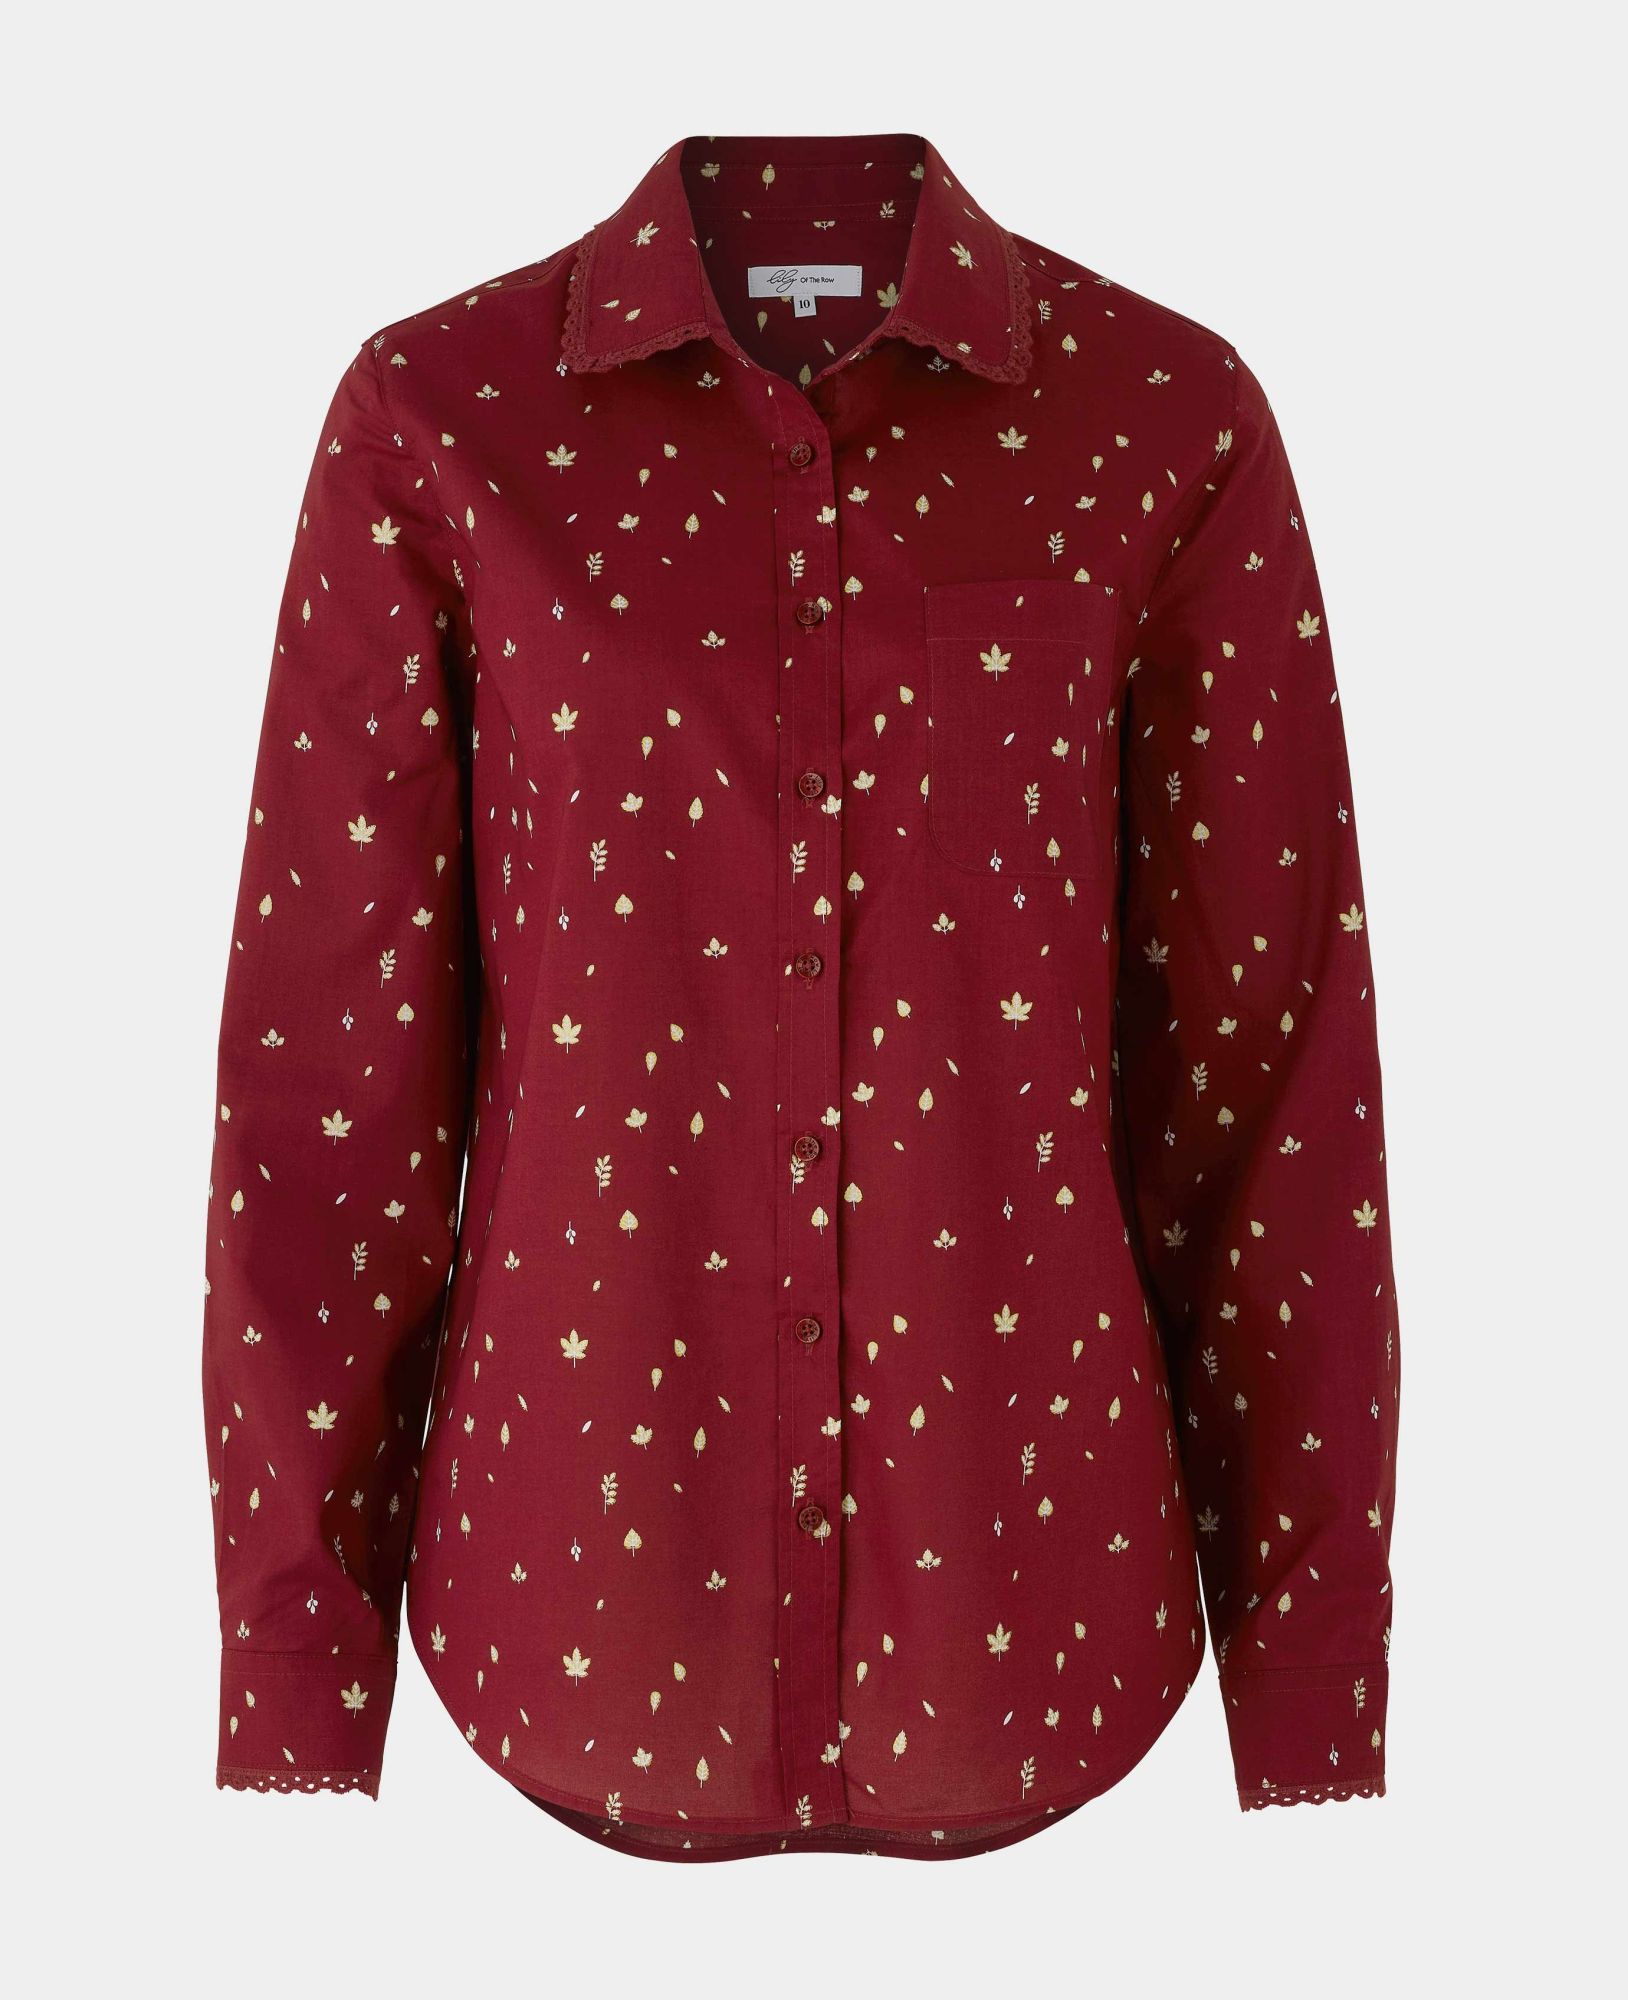 Women's Deep Red Leaf Print Semi Fitted Shirt 12